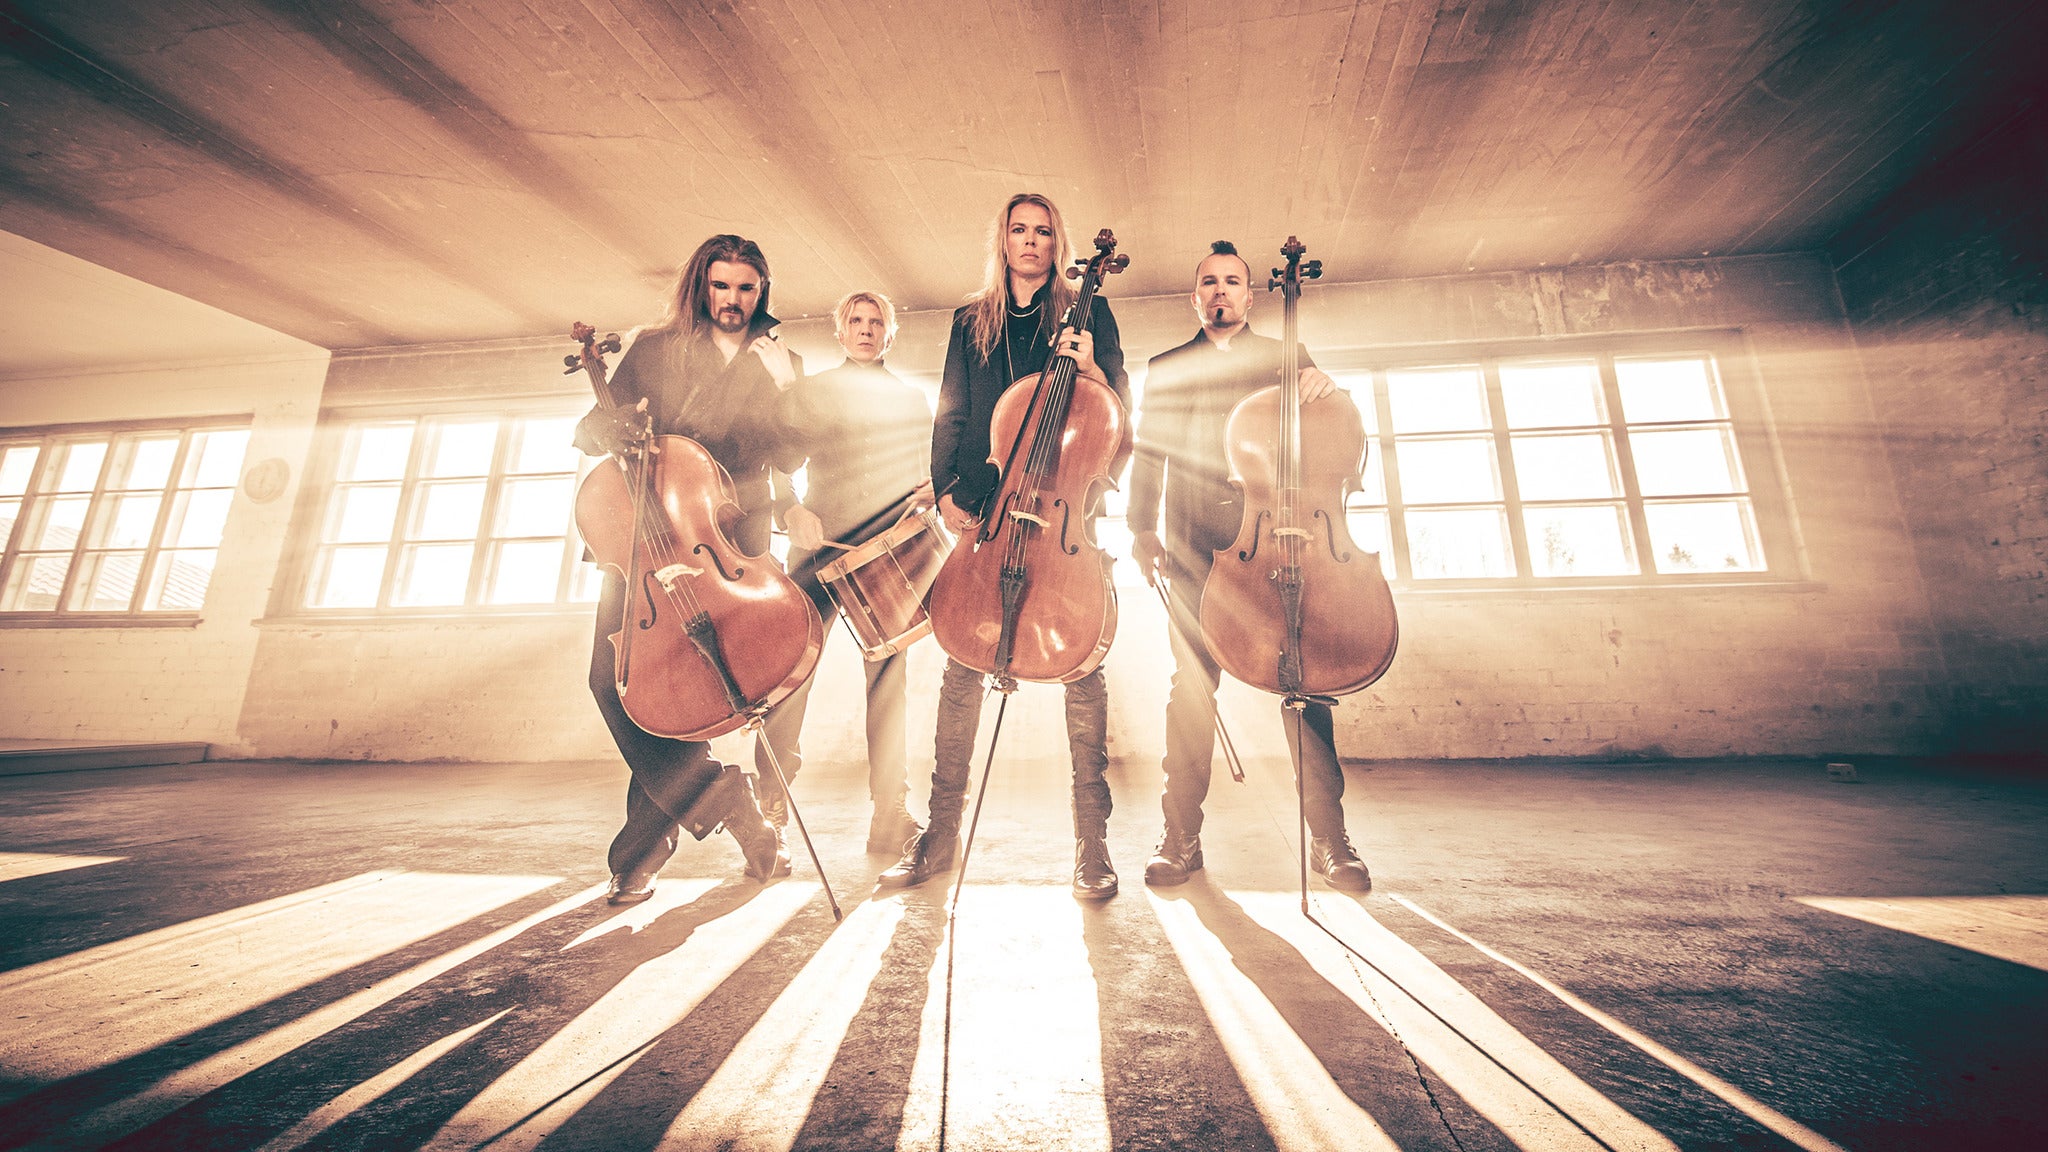 Apocalyptica - Cell-0 Tour at Intersection